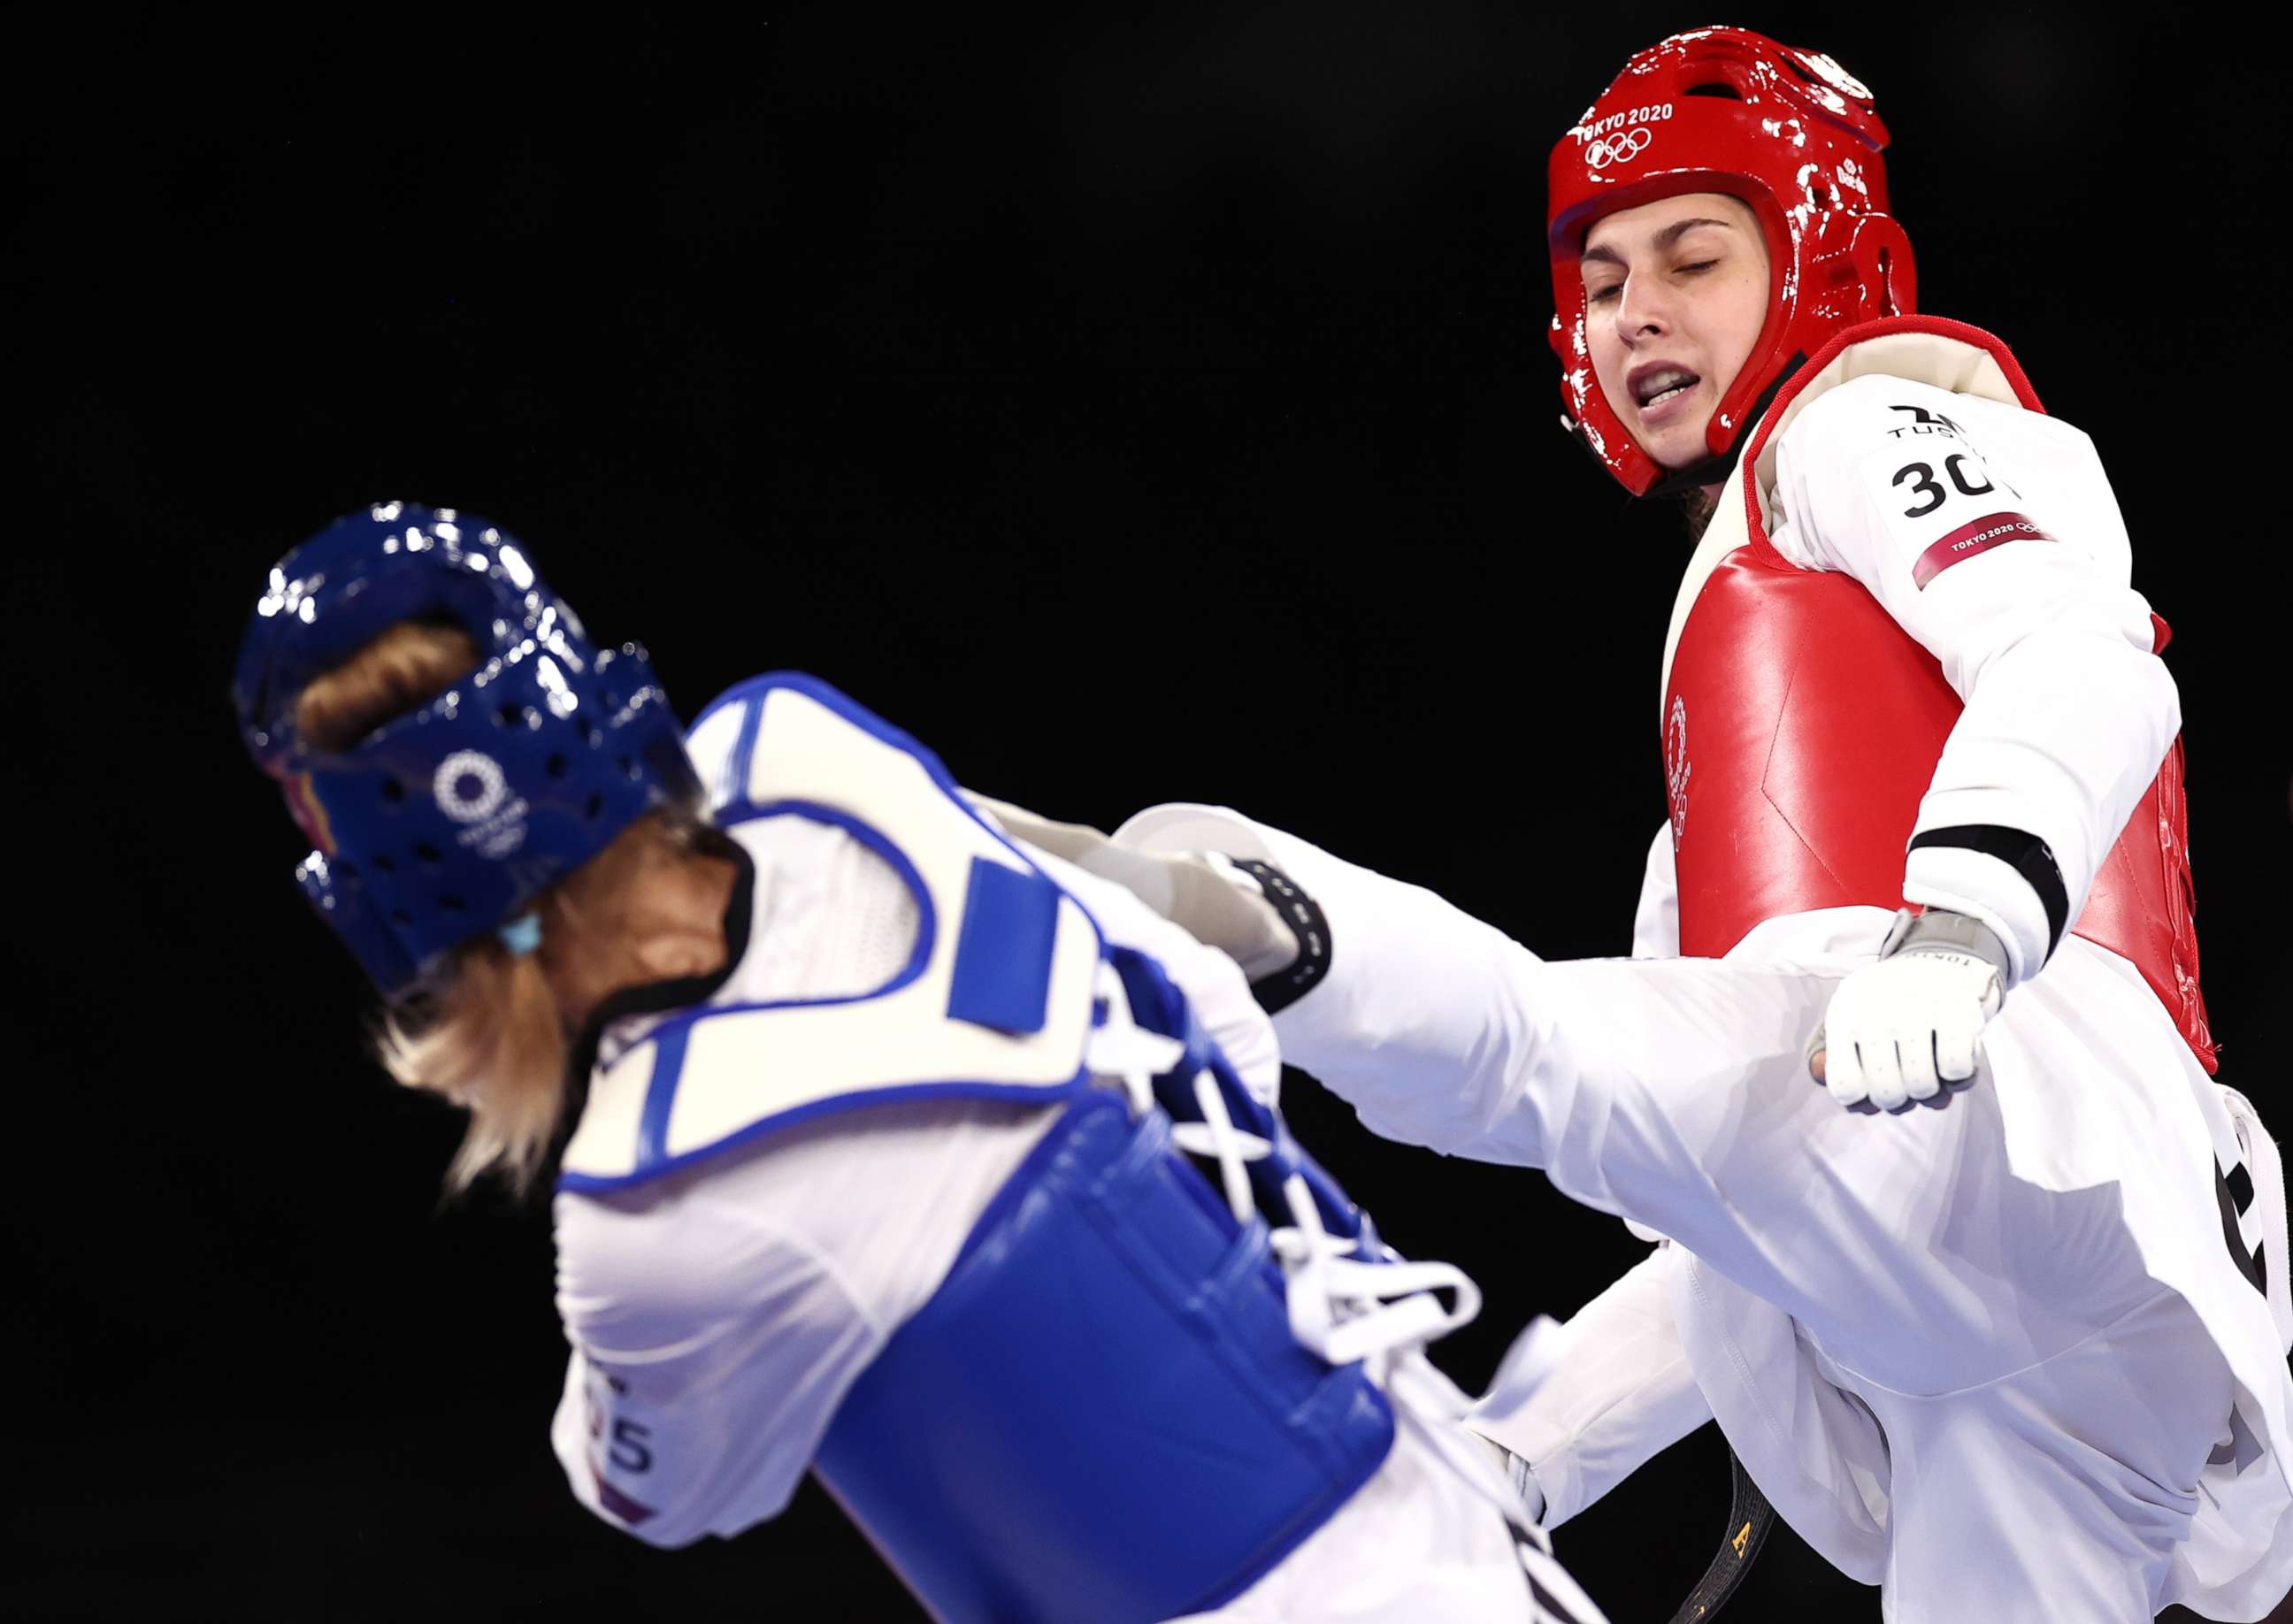 PHOTO: Anastasija Zolotic, right, competes defeats Tatiana Minina of the Russian Olympic Committee in the Women's -57kg Taekwondo gold medal bout at the Tokyo 2020 Olympic Games at on July 25, 2021 in Chiba, Japan.